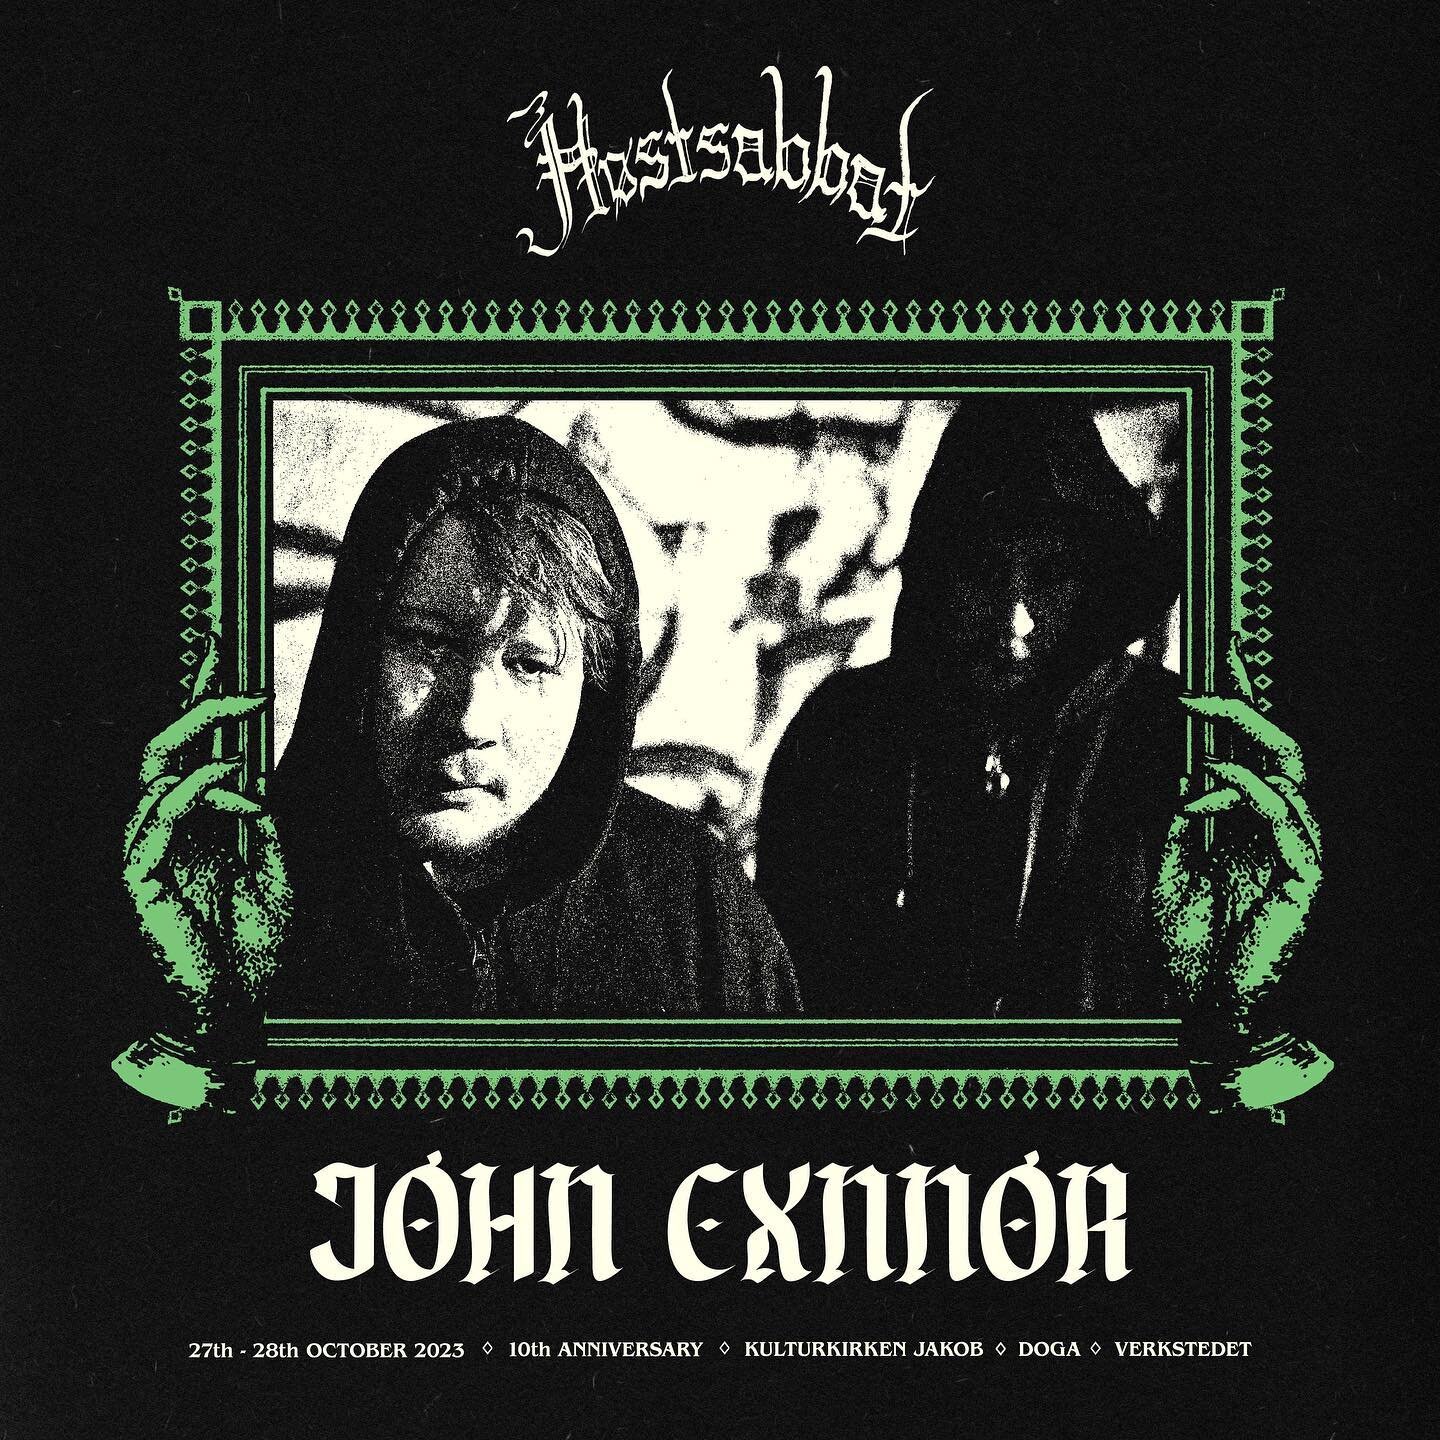 🔥JOHN CXNNOR (DK)🔥

Oh yes, for the first time in H&oslash;stsabbat history, we are welcoming a band strictly based on electronics. Please do not fear.
Heaviness is what we&acute;re all about, heaviness always wins, and 
todays announcement is no e